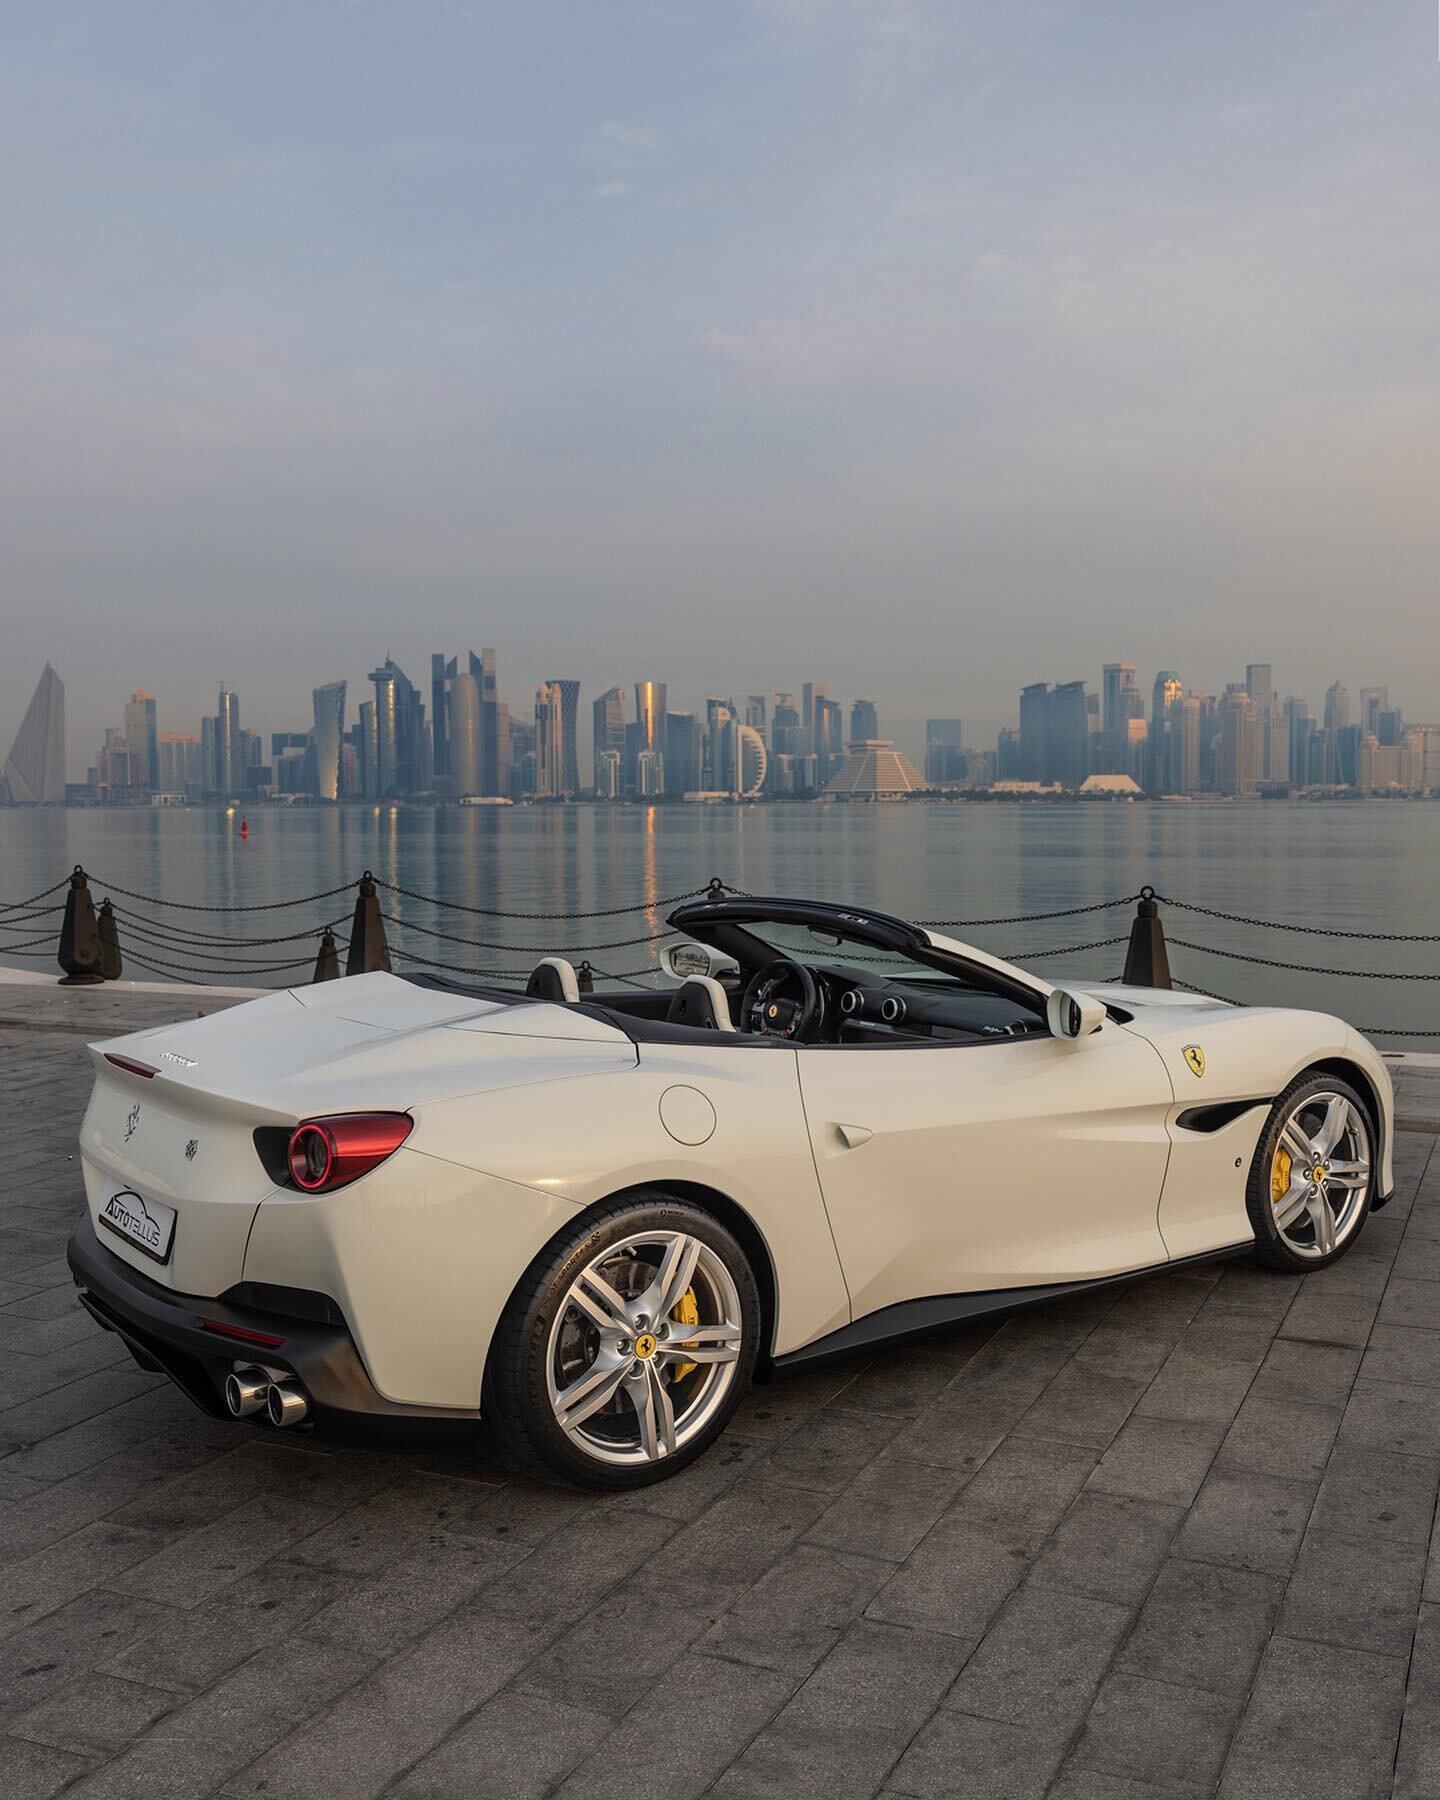 On a beautiful and peaceful morning like this, we are jumping into this timeless Ferrari Portofino. My Gosh, I think I really starting to have a thing for Ferraris now. For anybody that has ever driven one, they understand. It&rsquo;s something about